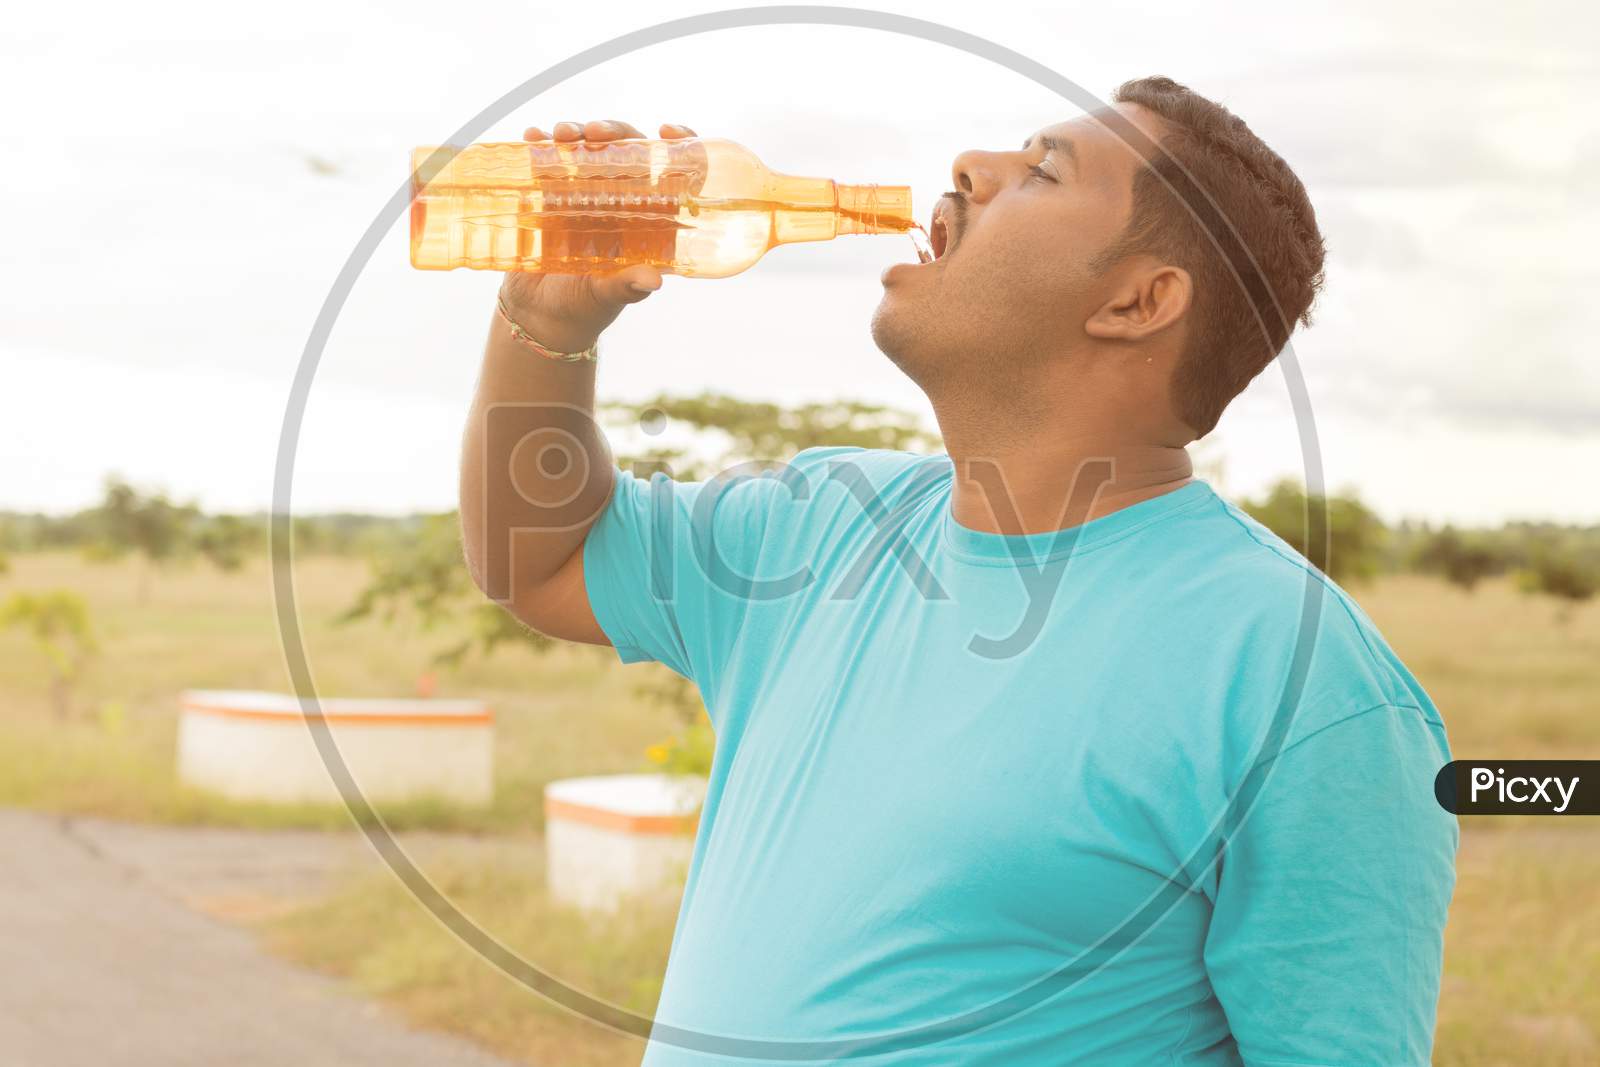 A Tired Man Drinking water after A Running Activity or Fitness Activity